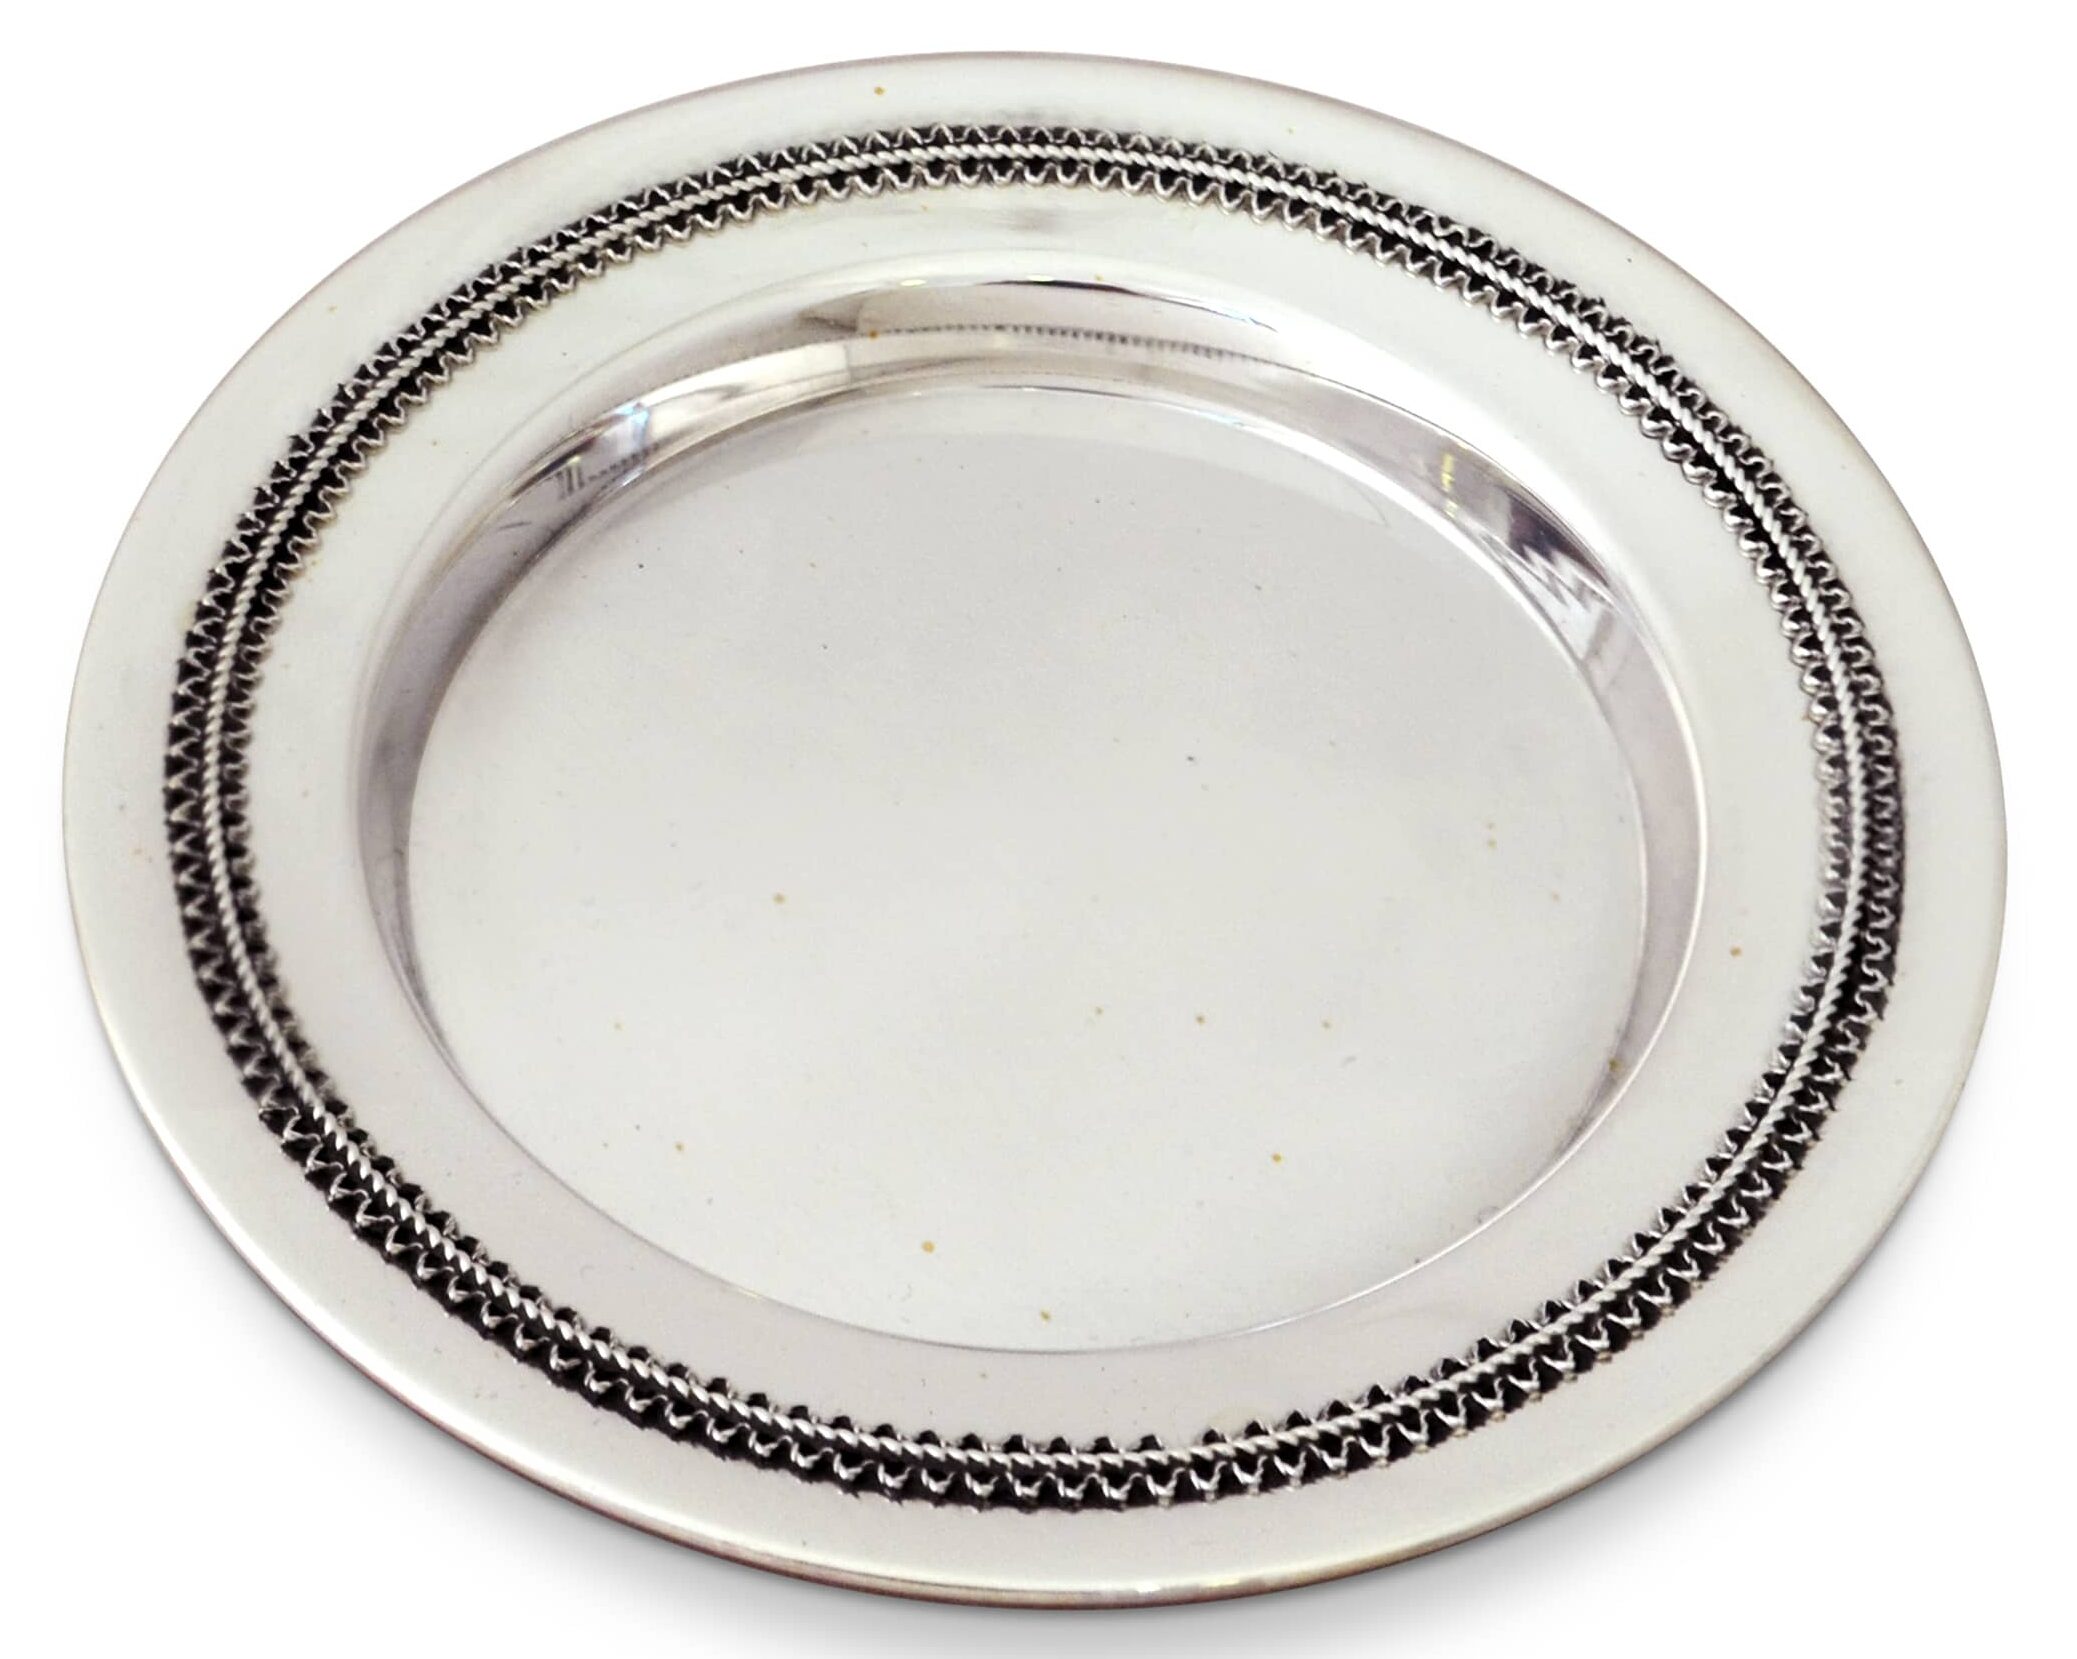 Unique Sterling Silver Plate with Filigree Decorations